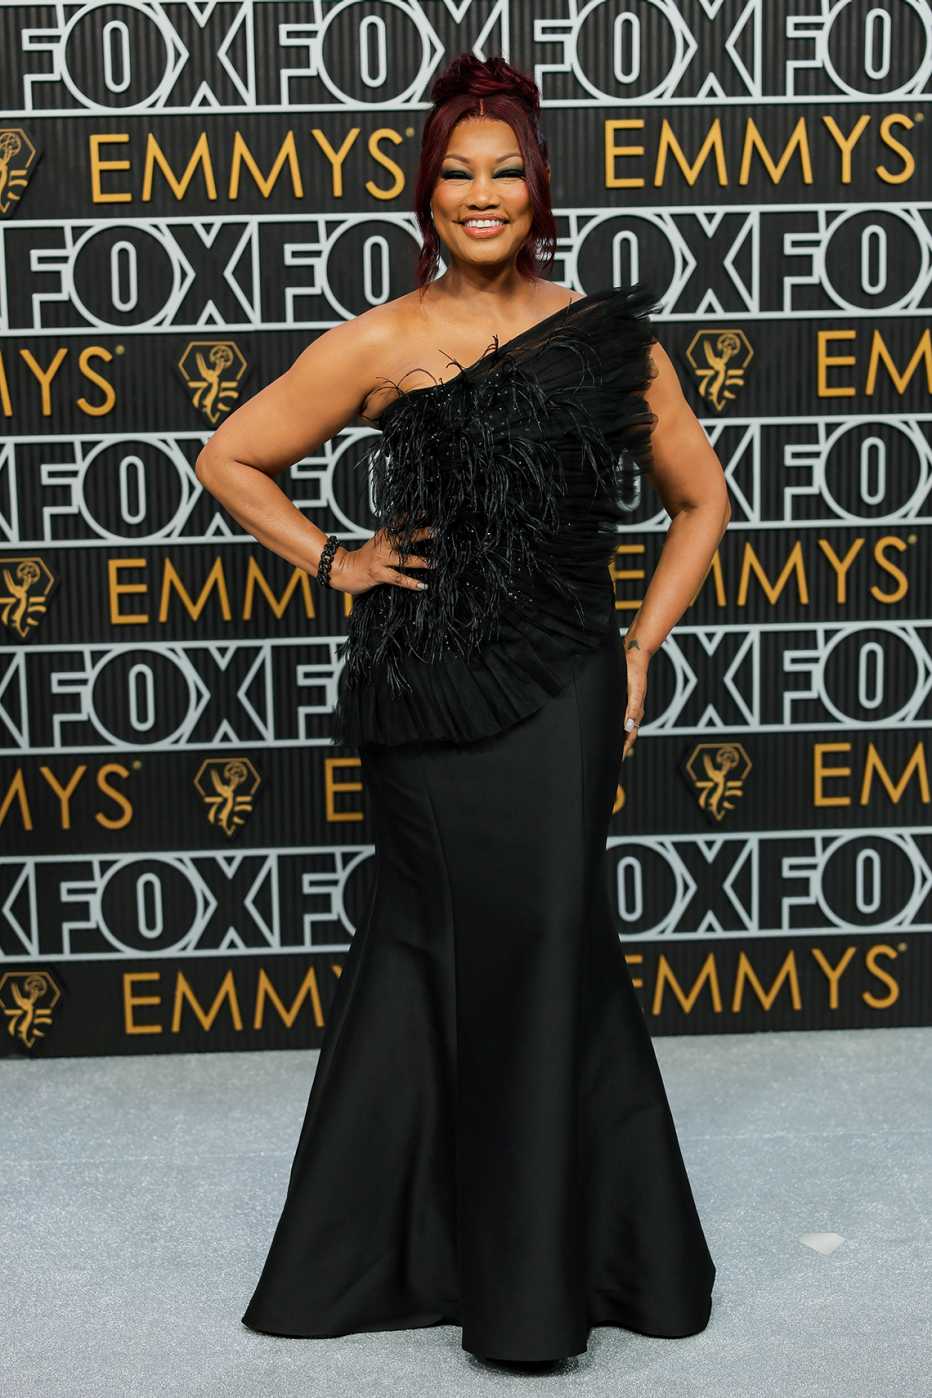 Garcelle Beauvais on the red carpet at the 75th Emmy Awards